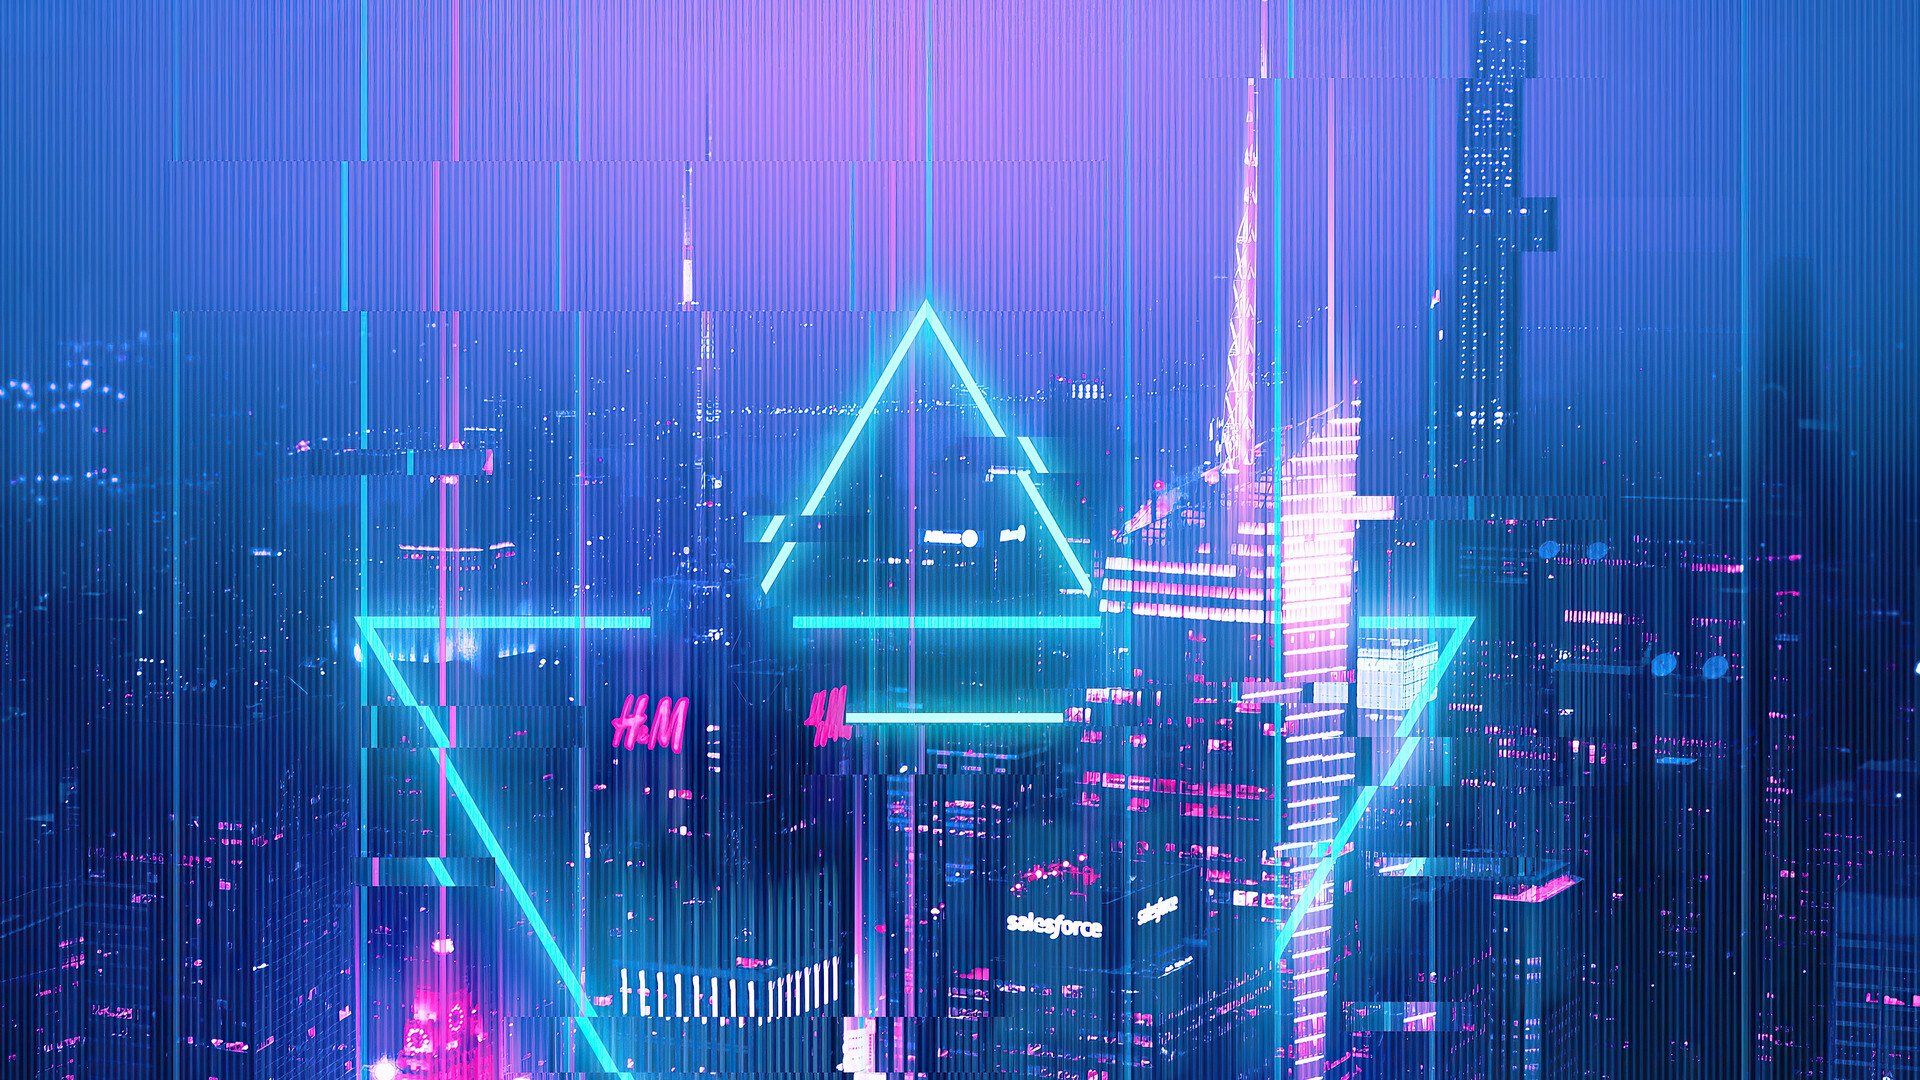 Glitch: Abstract city, Neon equilateral triangles, Acute angles, Parallel lines. 1920x1080 Full HD Wallpaper.